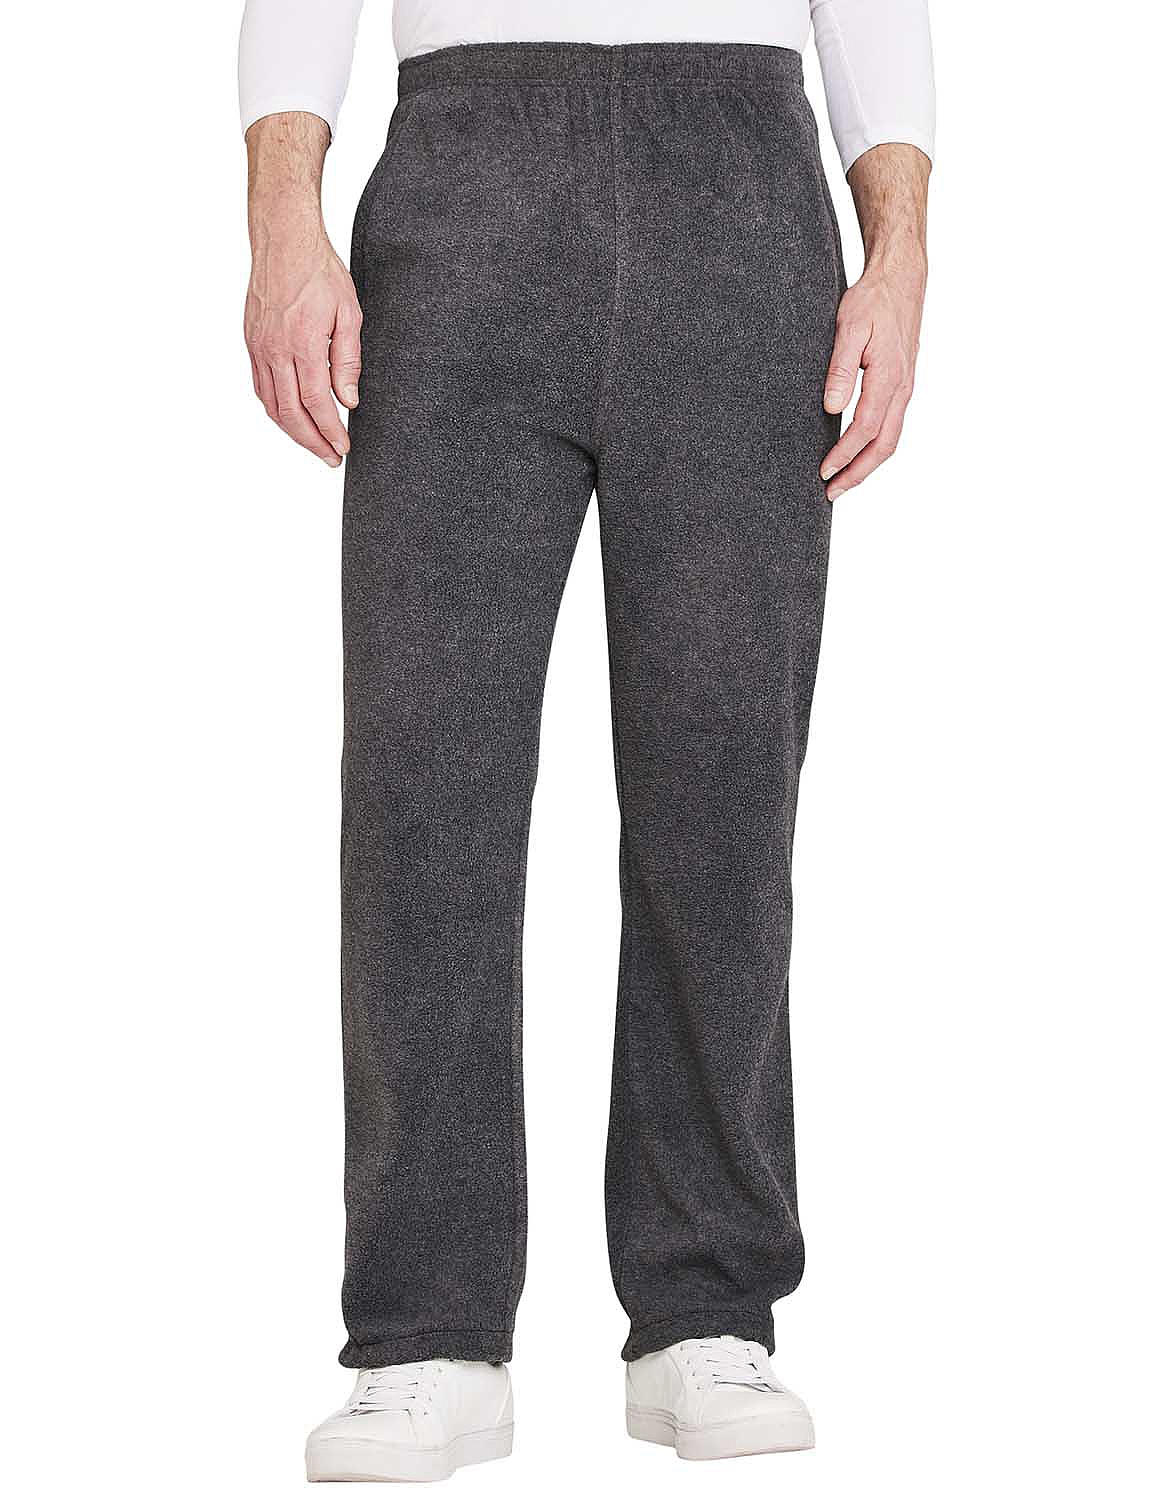 Pegasus Thermal Fleece Pull On Leisure Trouser | Chums